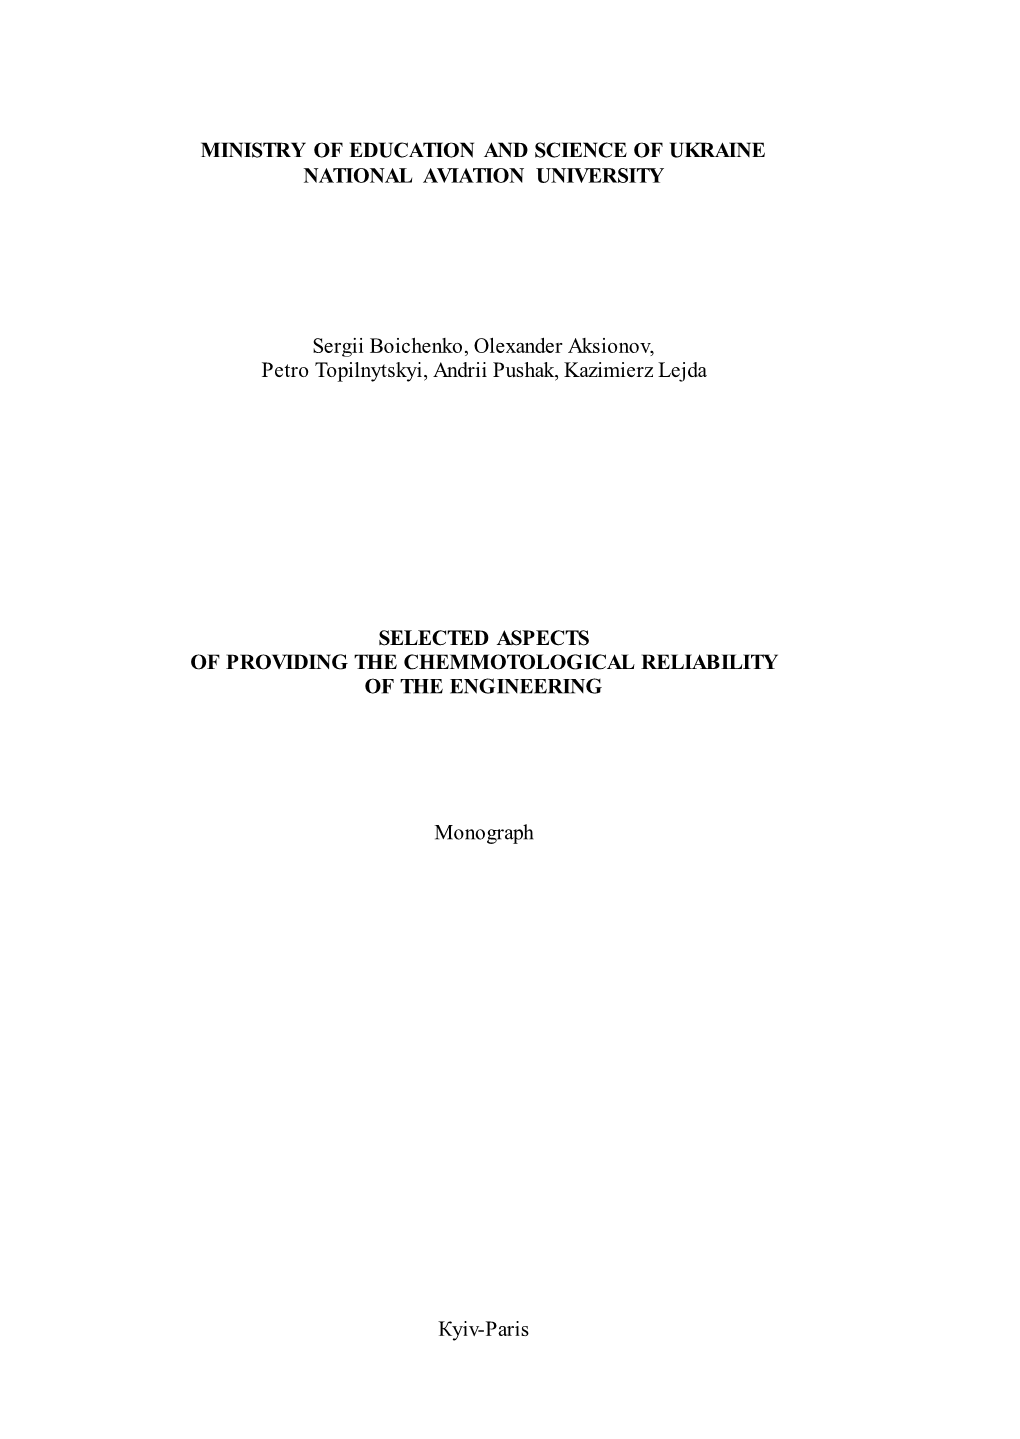 CHEMMOTOLOGICAL RELIABILITY.Pdf